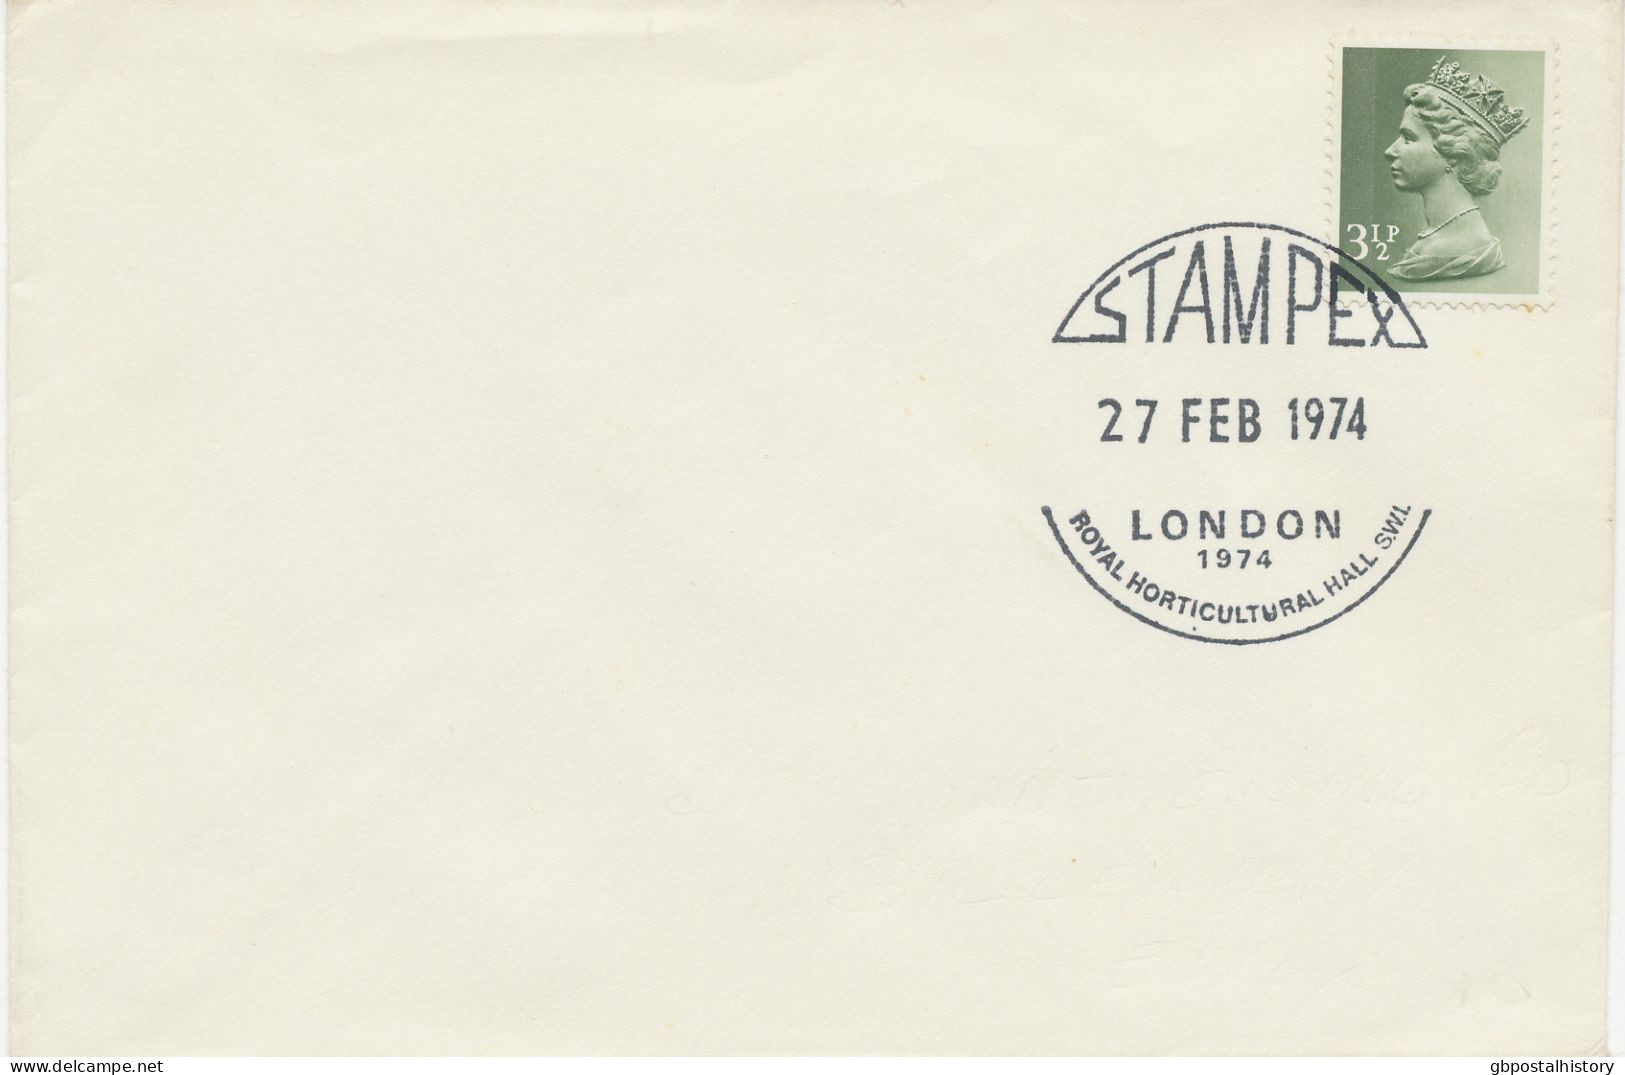 GB SPECIAL EVENT POSTMARKS 1974 STAMPEX LONDON ROYAL HORTICULTURAL HALL S.W.I. - Covers & Documents